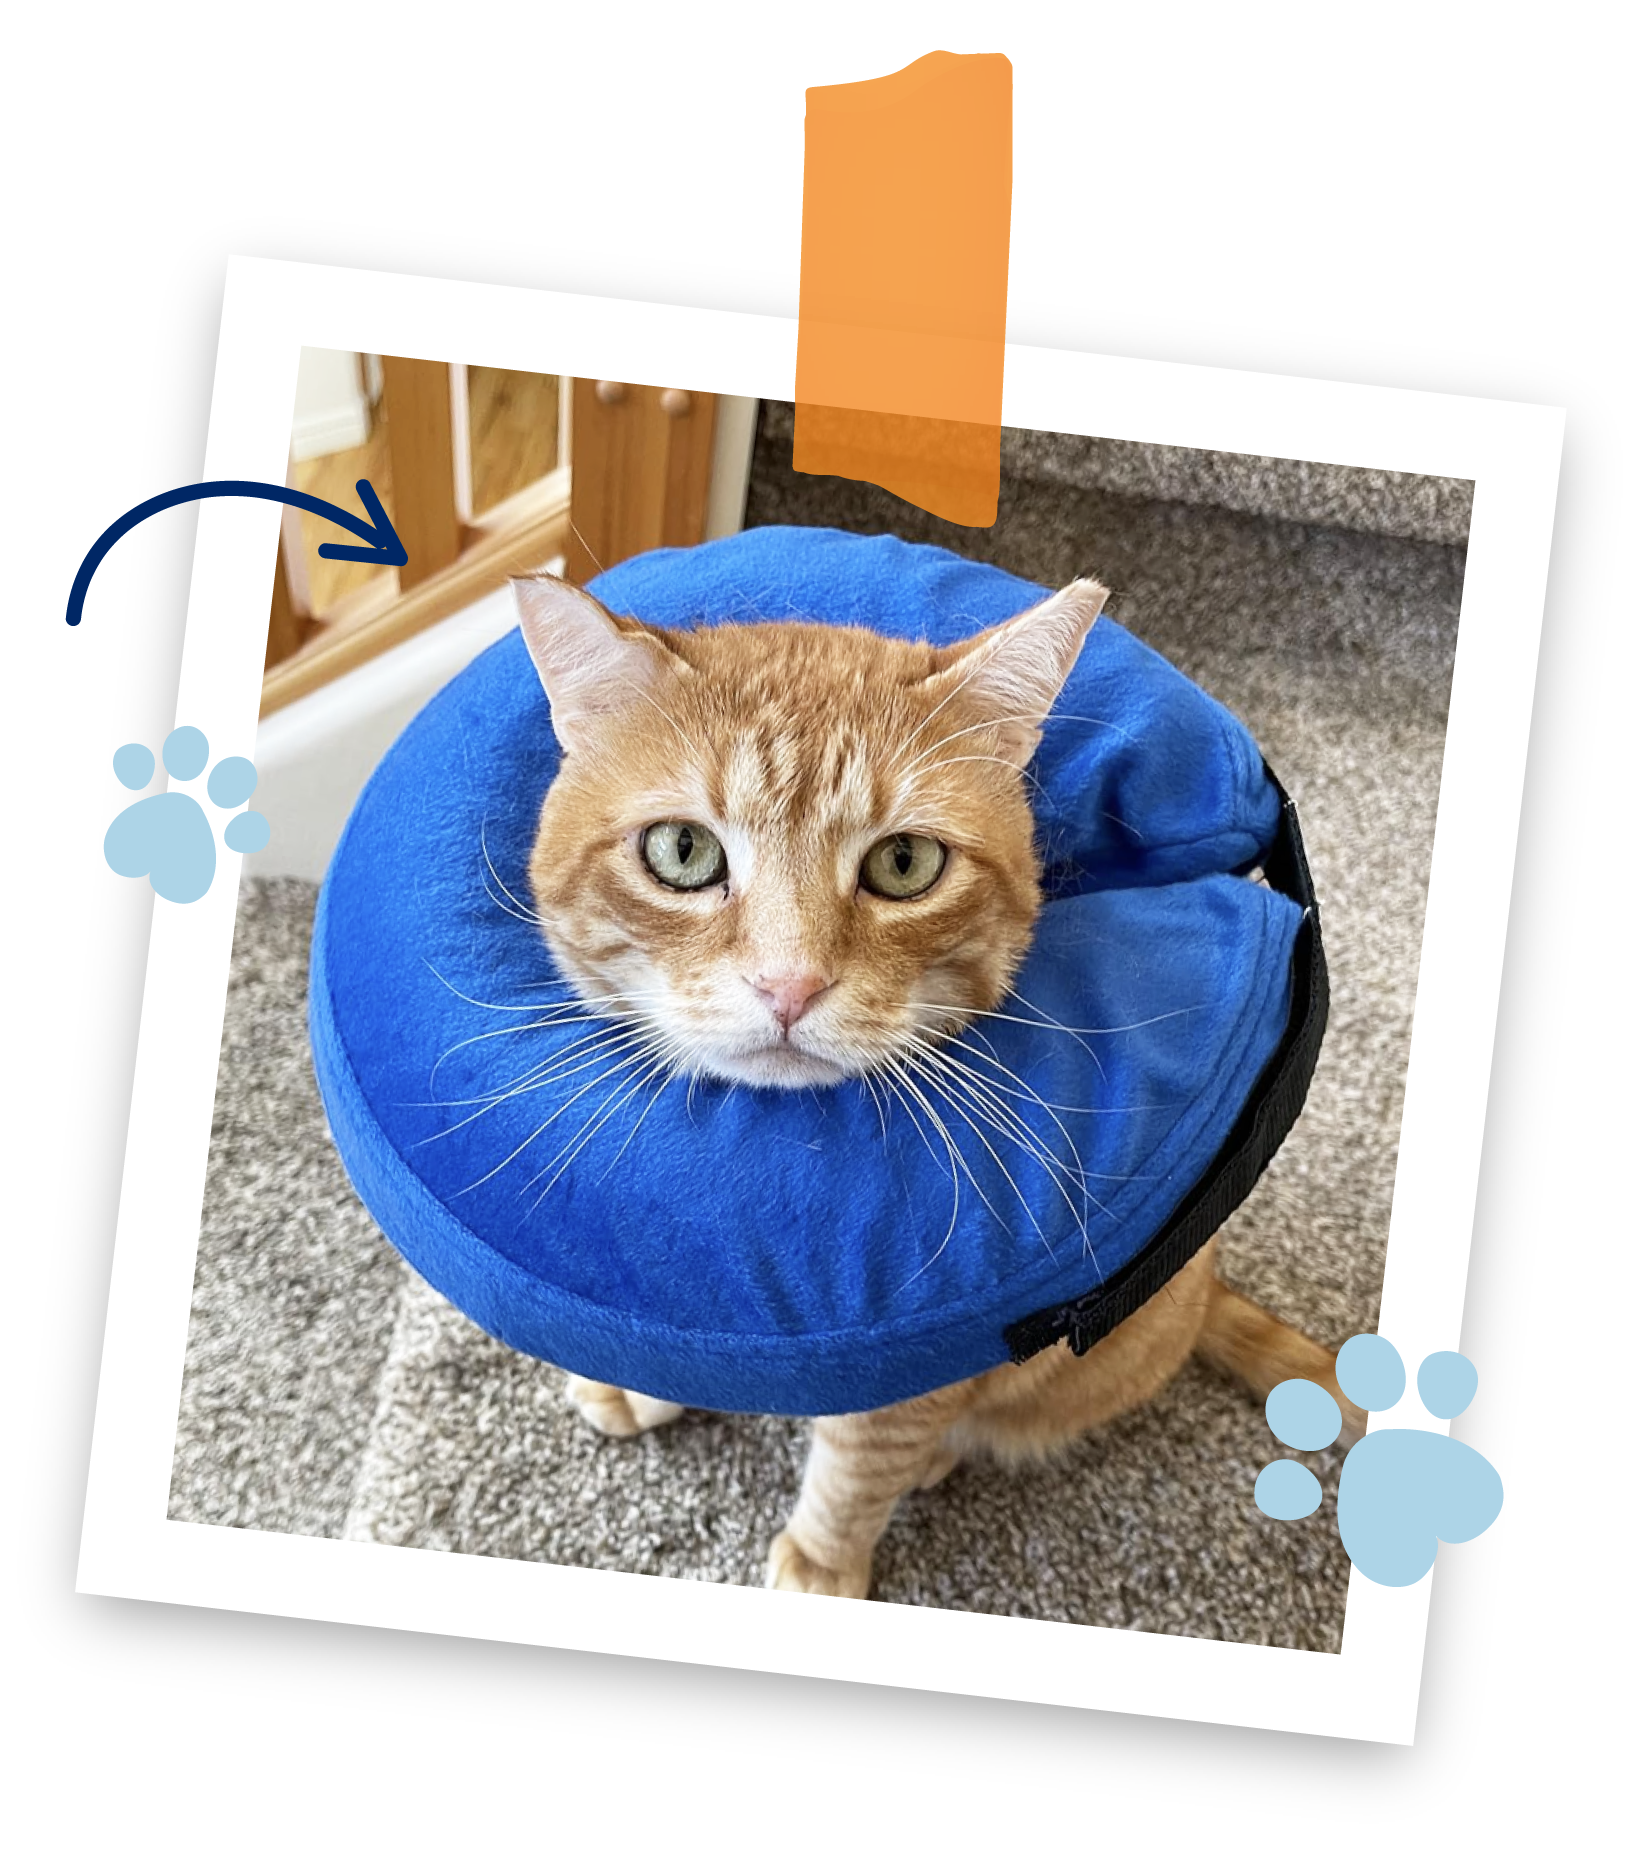 a polaroid of a orange tabby cat wearing a blue inflatable collar looking